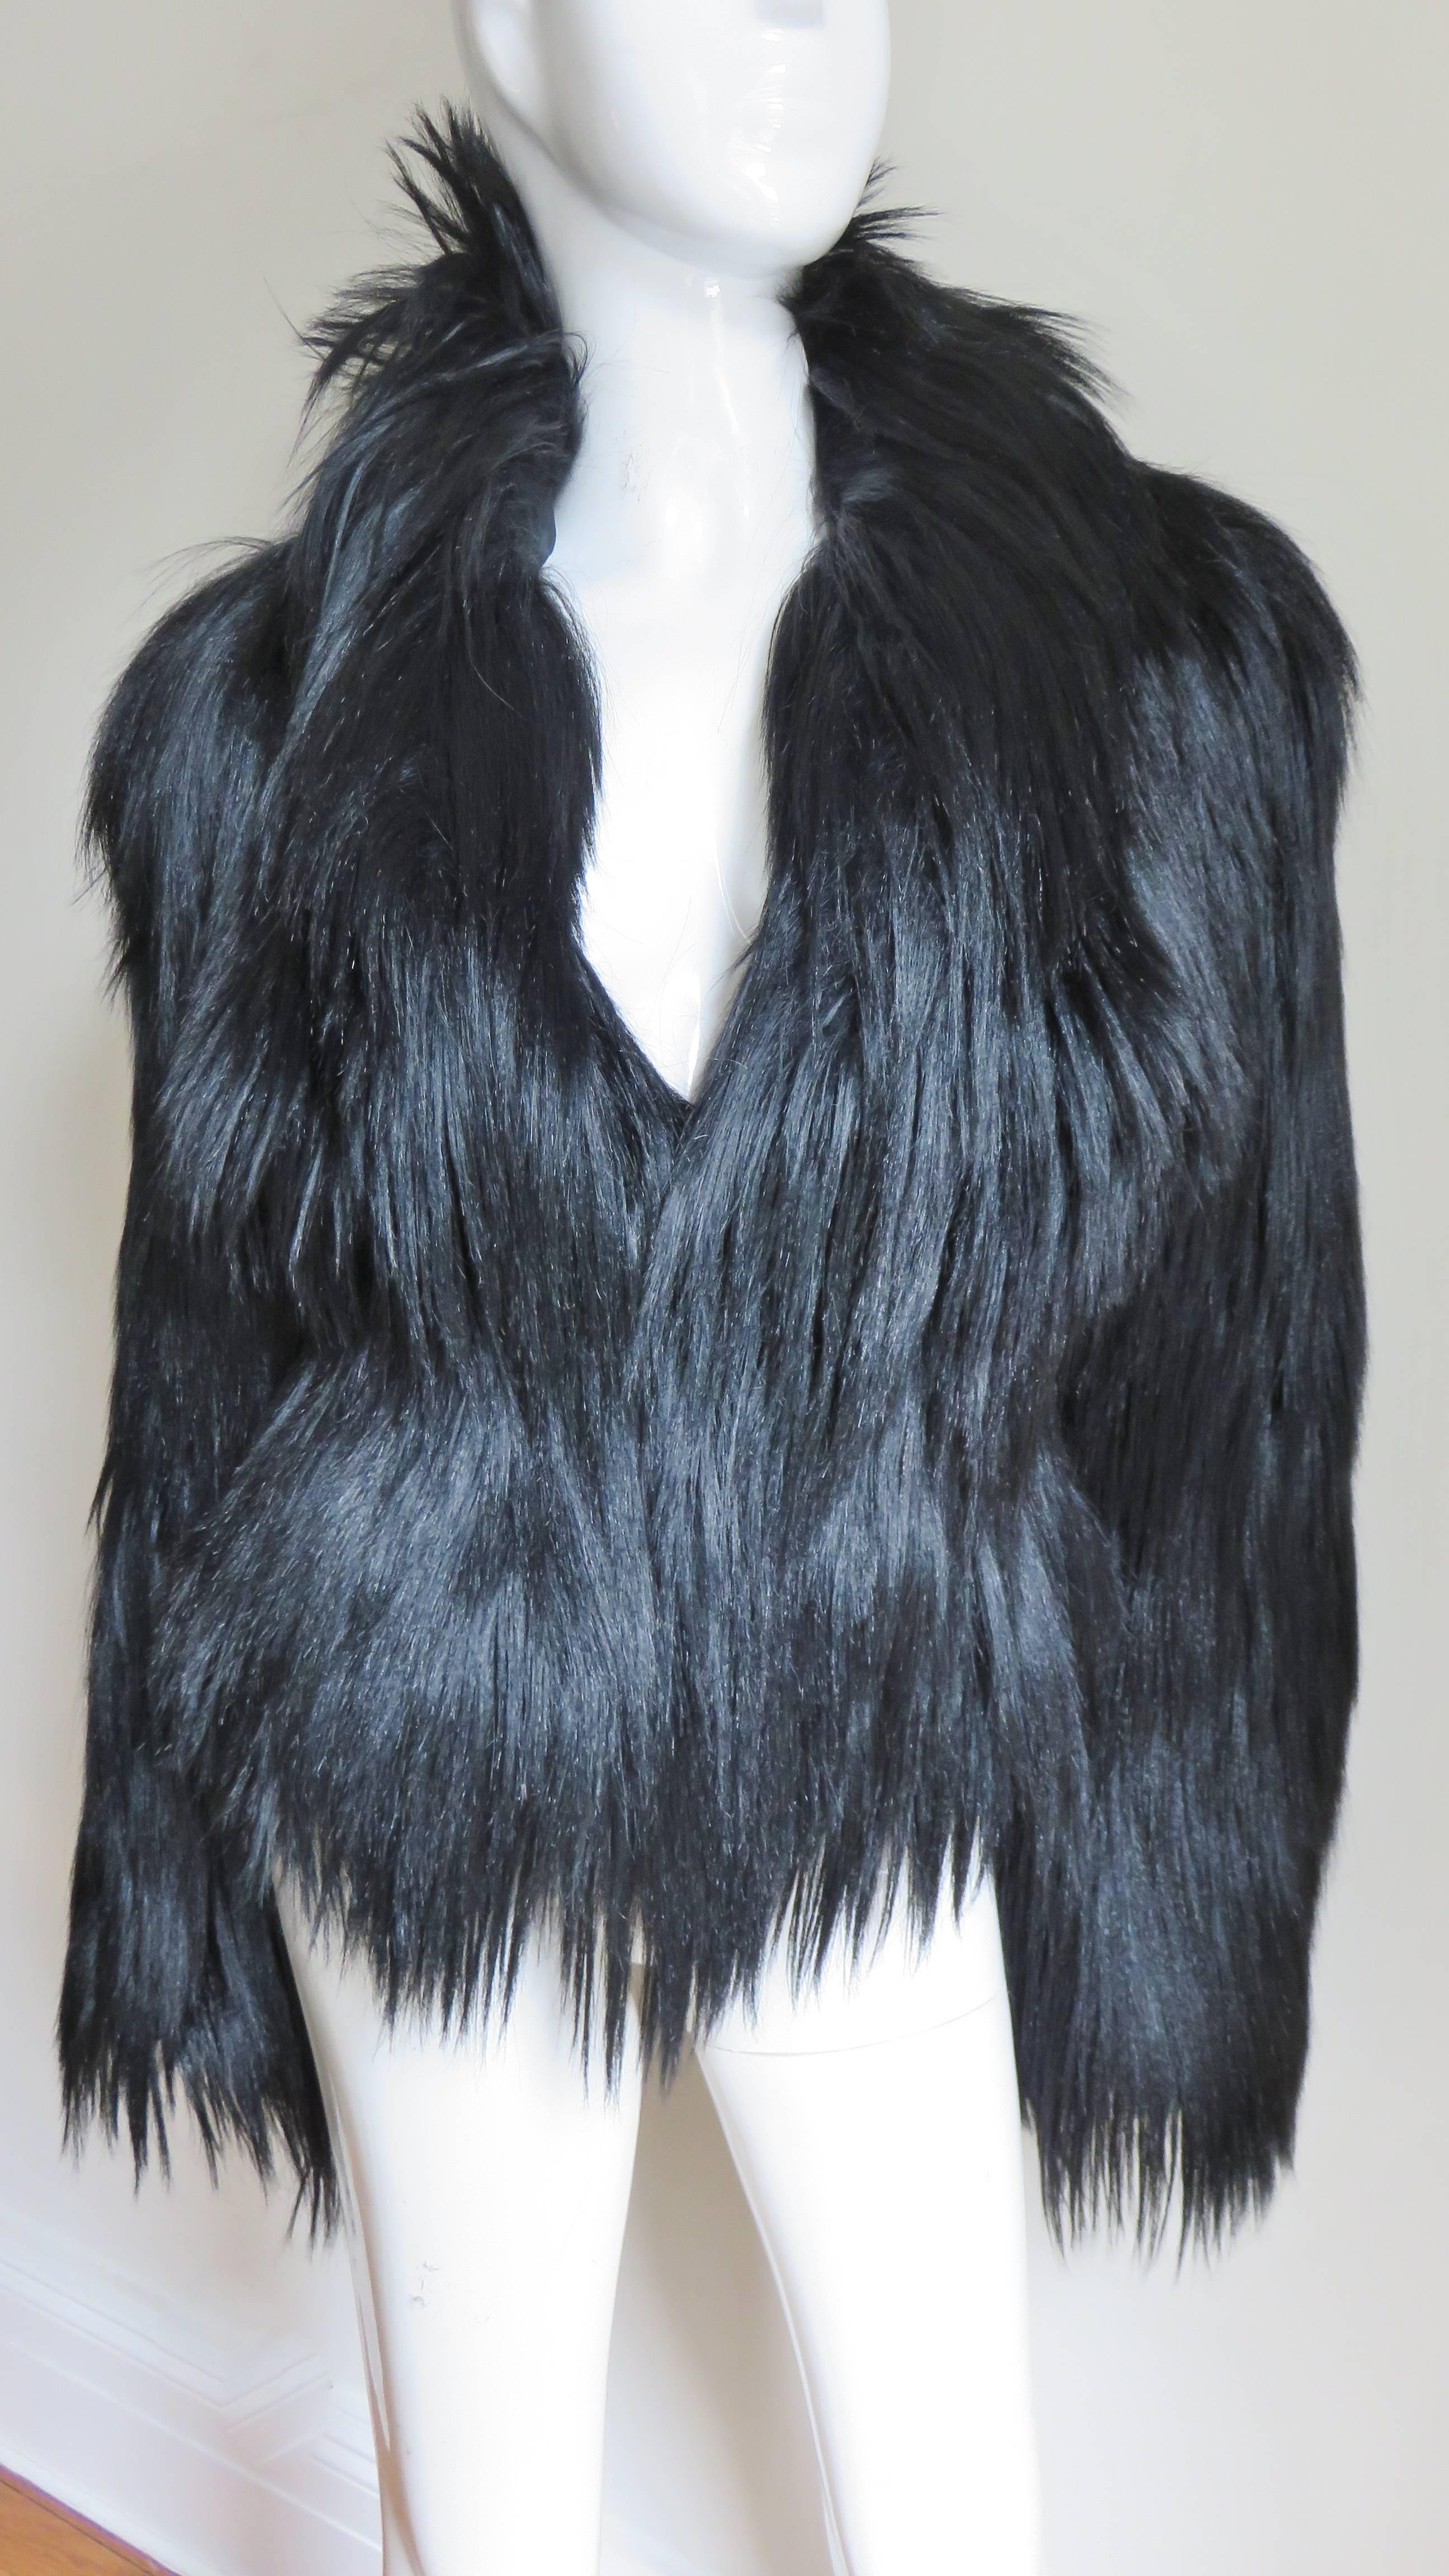 This is an incredible black shiny, soft and silky goat fur jacket from Alexander McQueen.  It has a V neckline, front fur hook closures and is lined in black silk.  The entire jacket  has long silky black goat hair draping luxuriously throughout